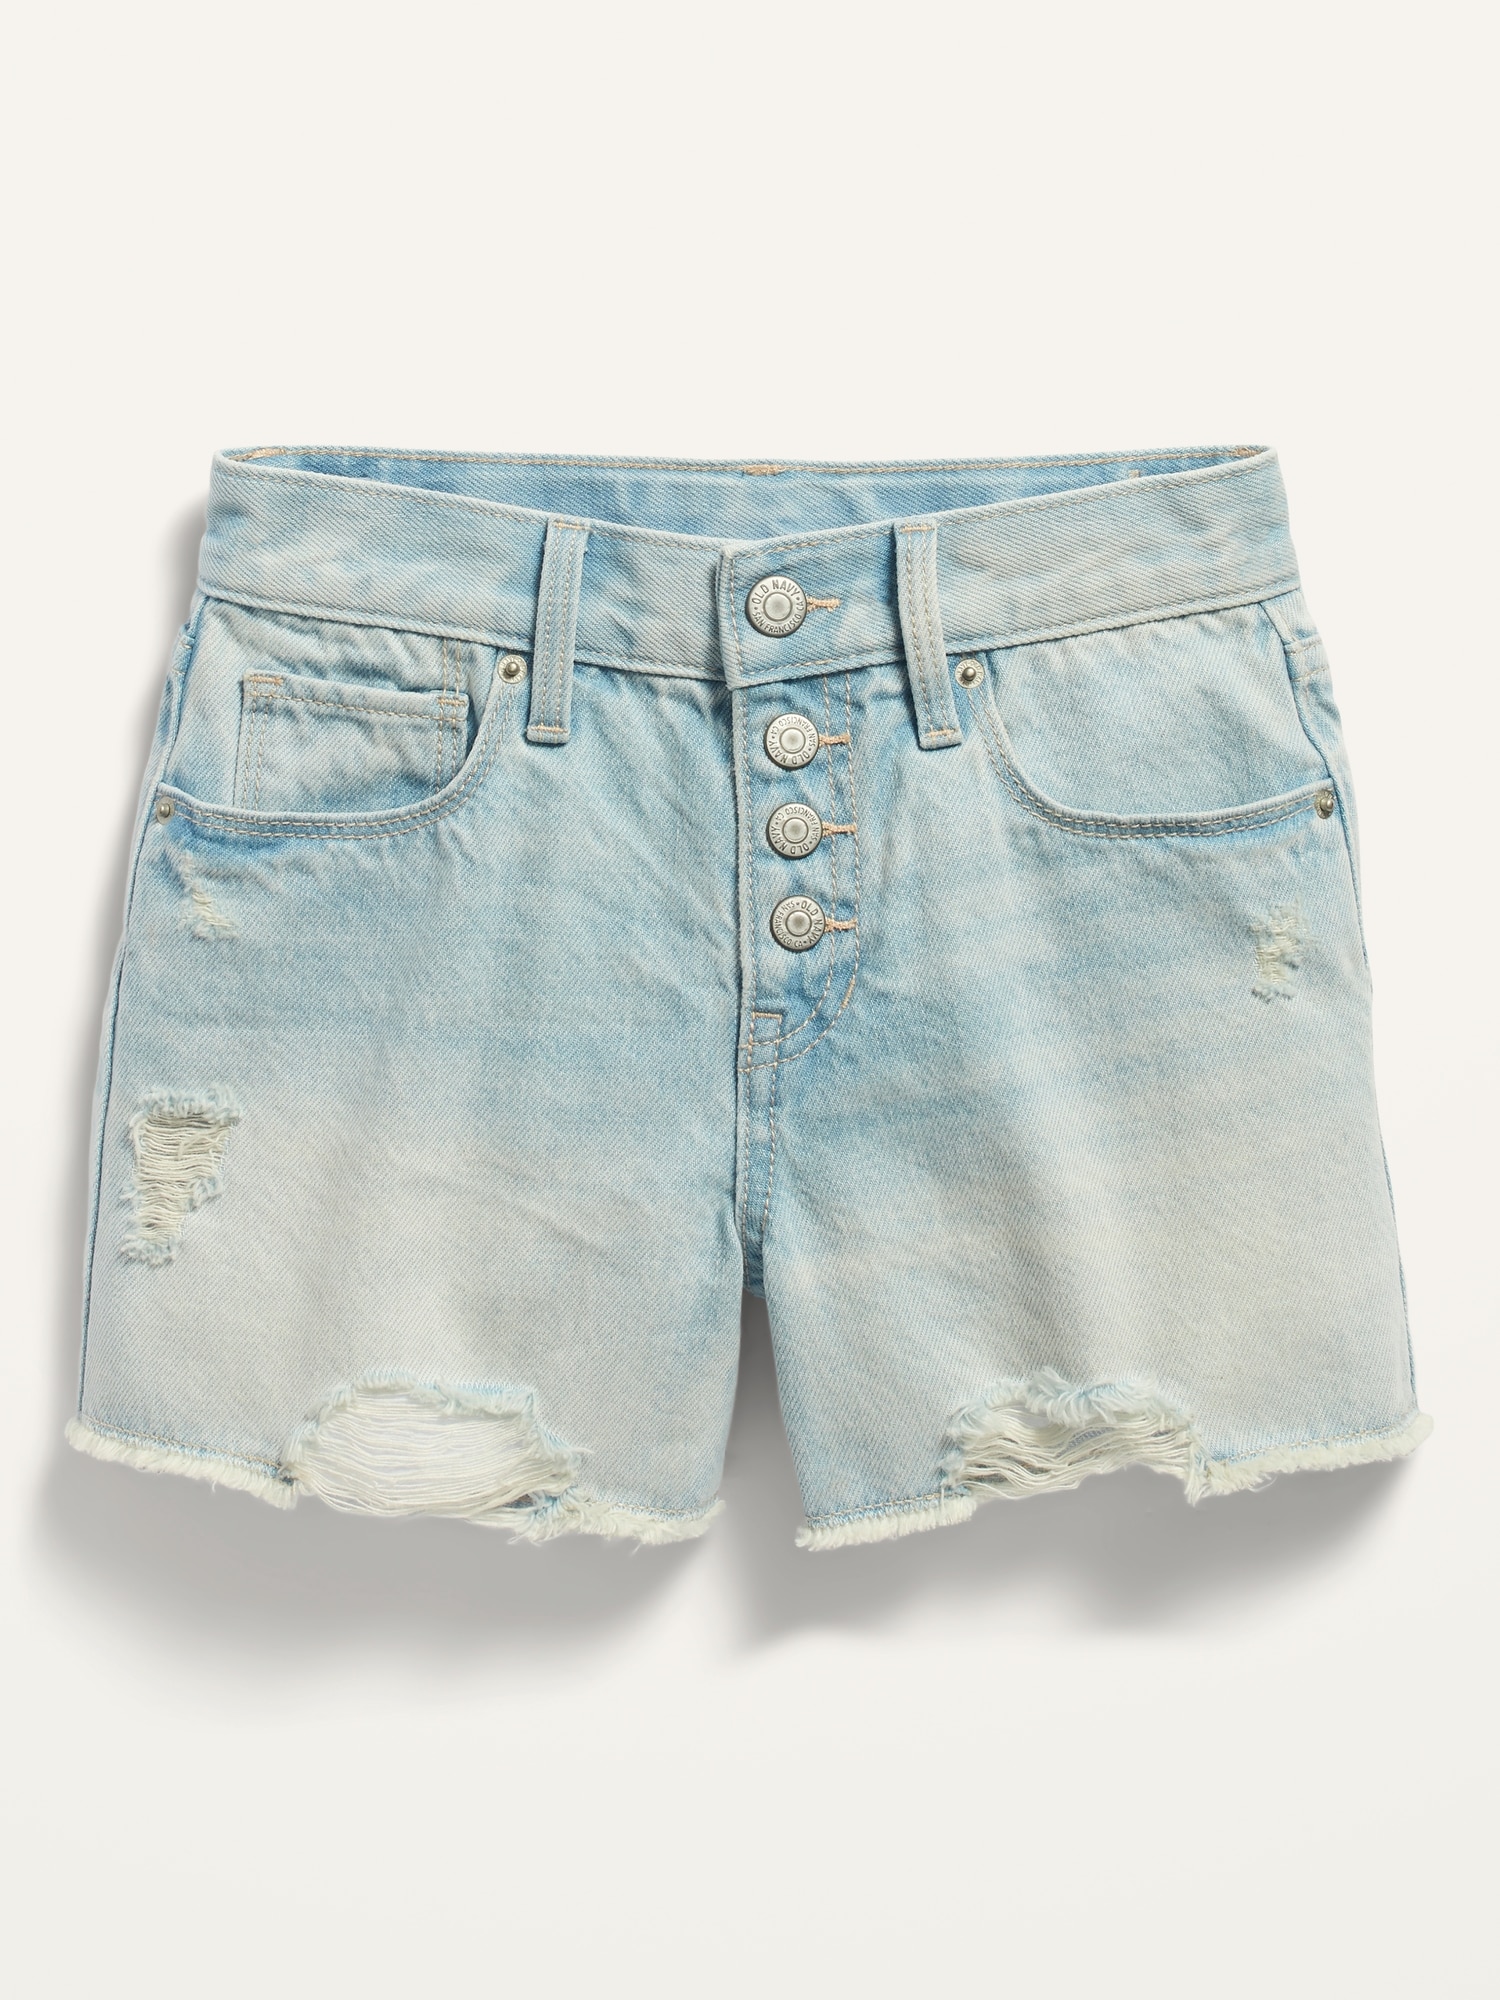 Extra High-Waisted Light-Wash Distressed Cut-Off Jean Shorts for Girls